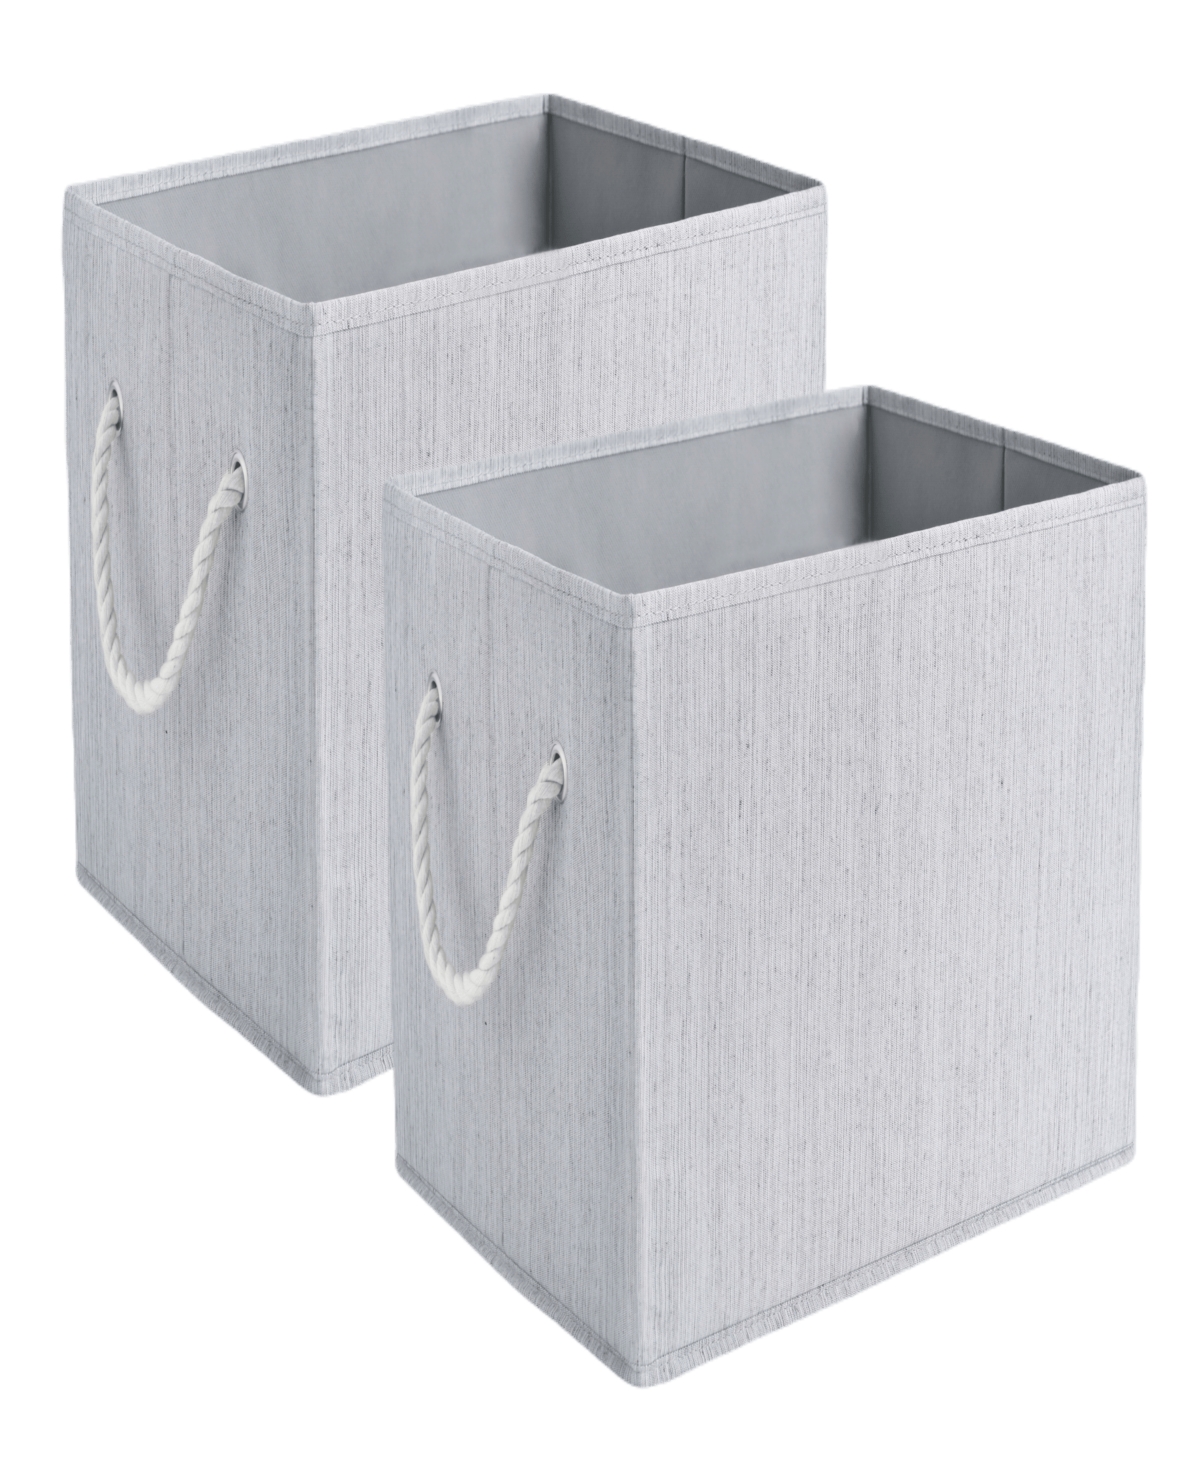 Wethinkstorage 34 Litre Collapsible Fabric Storage Bins With Cotton Rope Handles, Set Of 2 In Gray